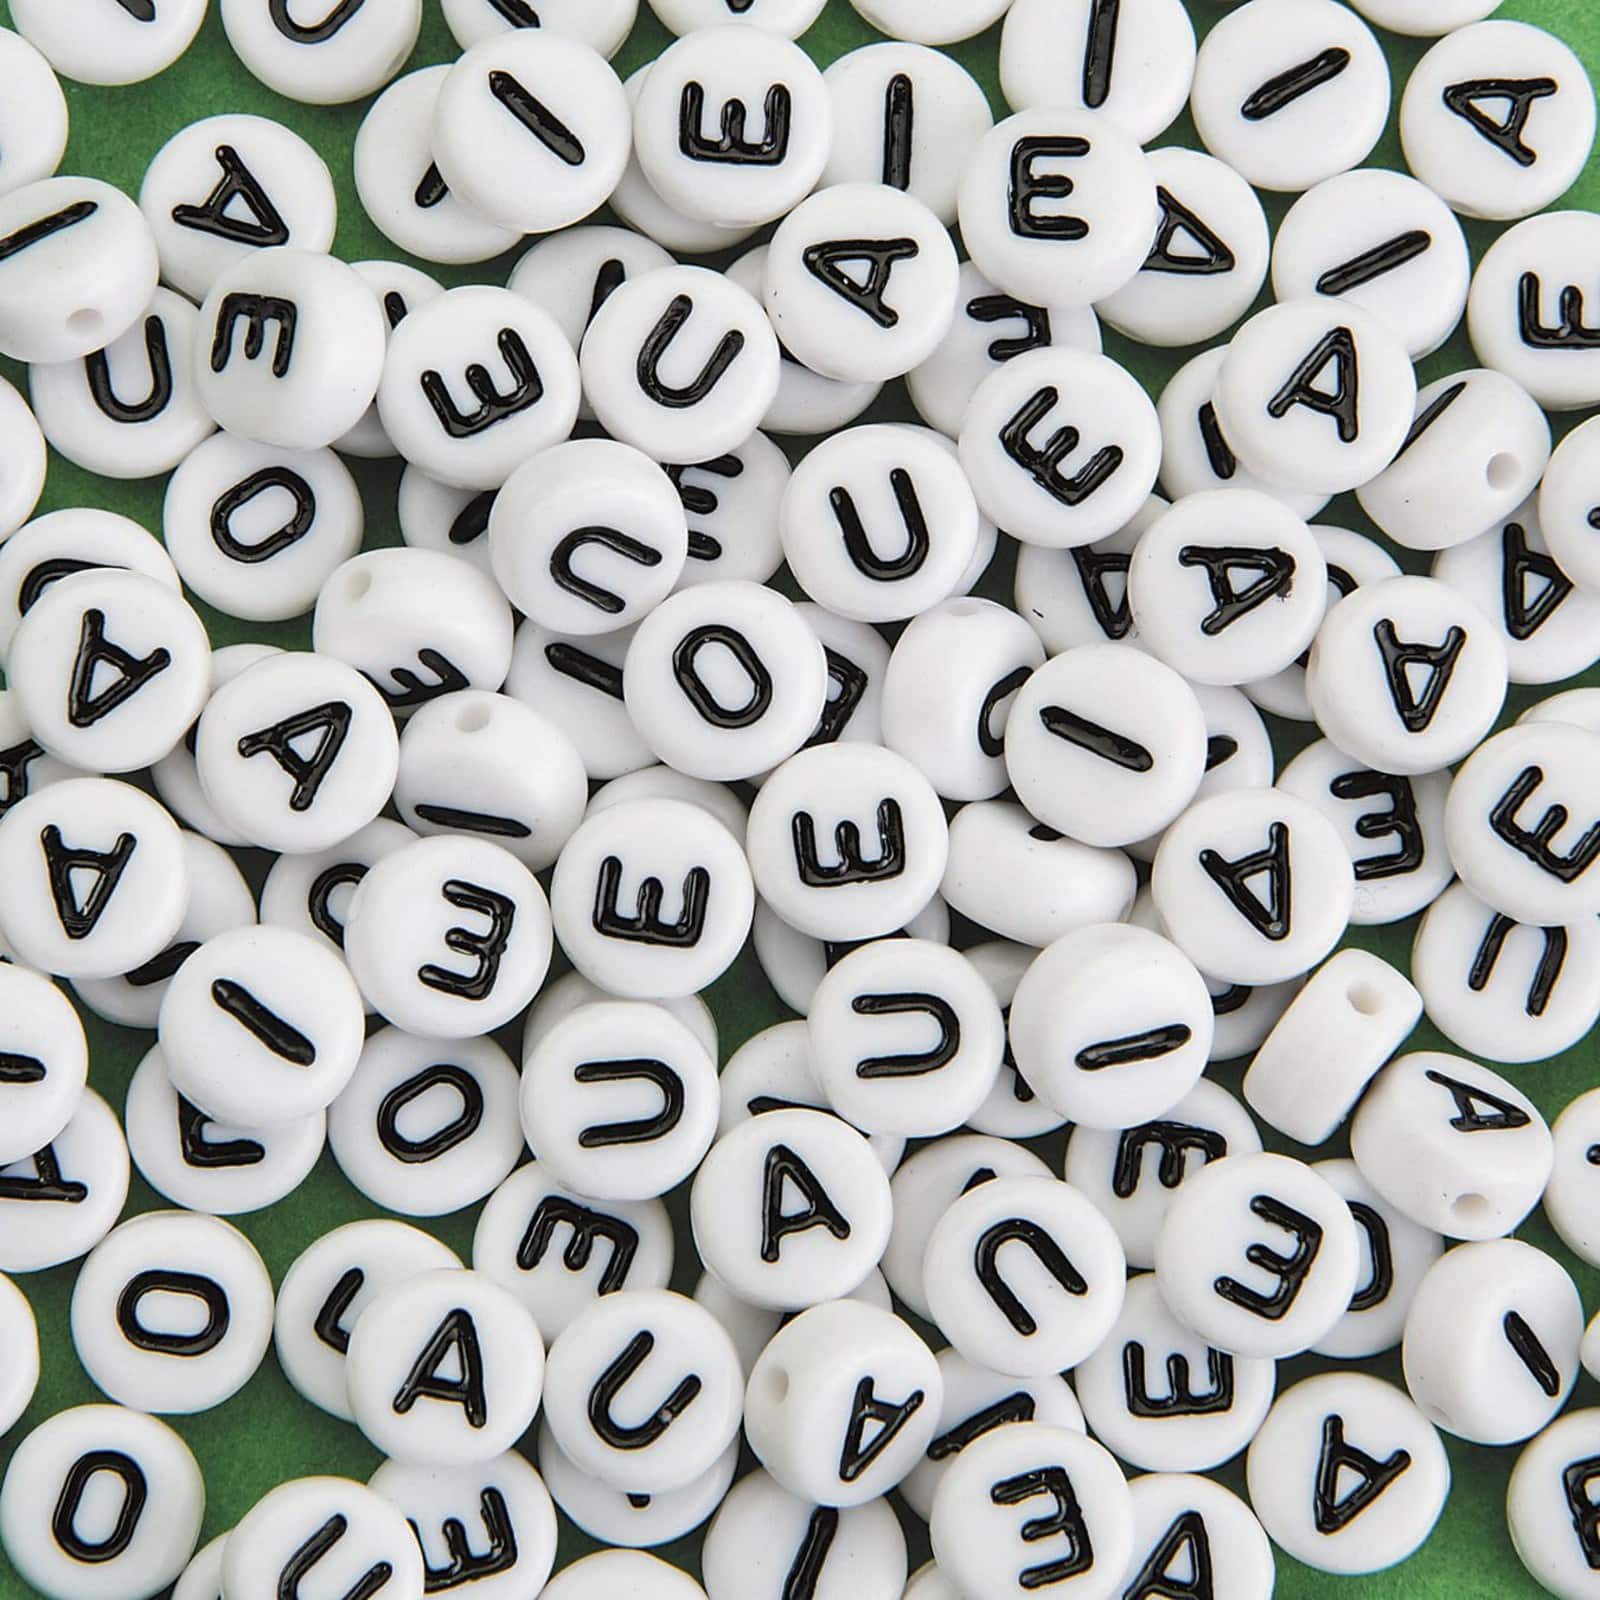 7mm Vowel Alphabet Beads, Pack of 25 (5 of each vowel)